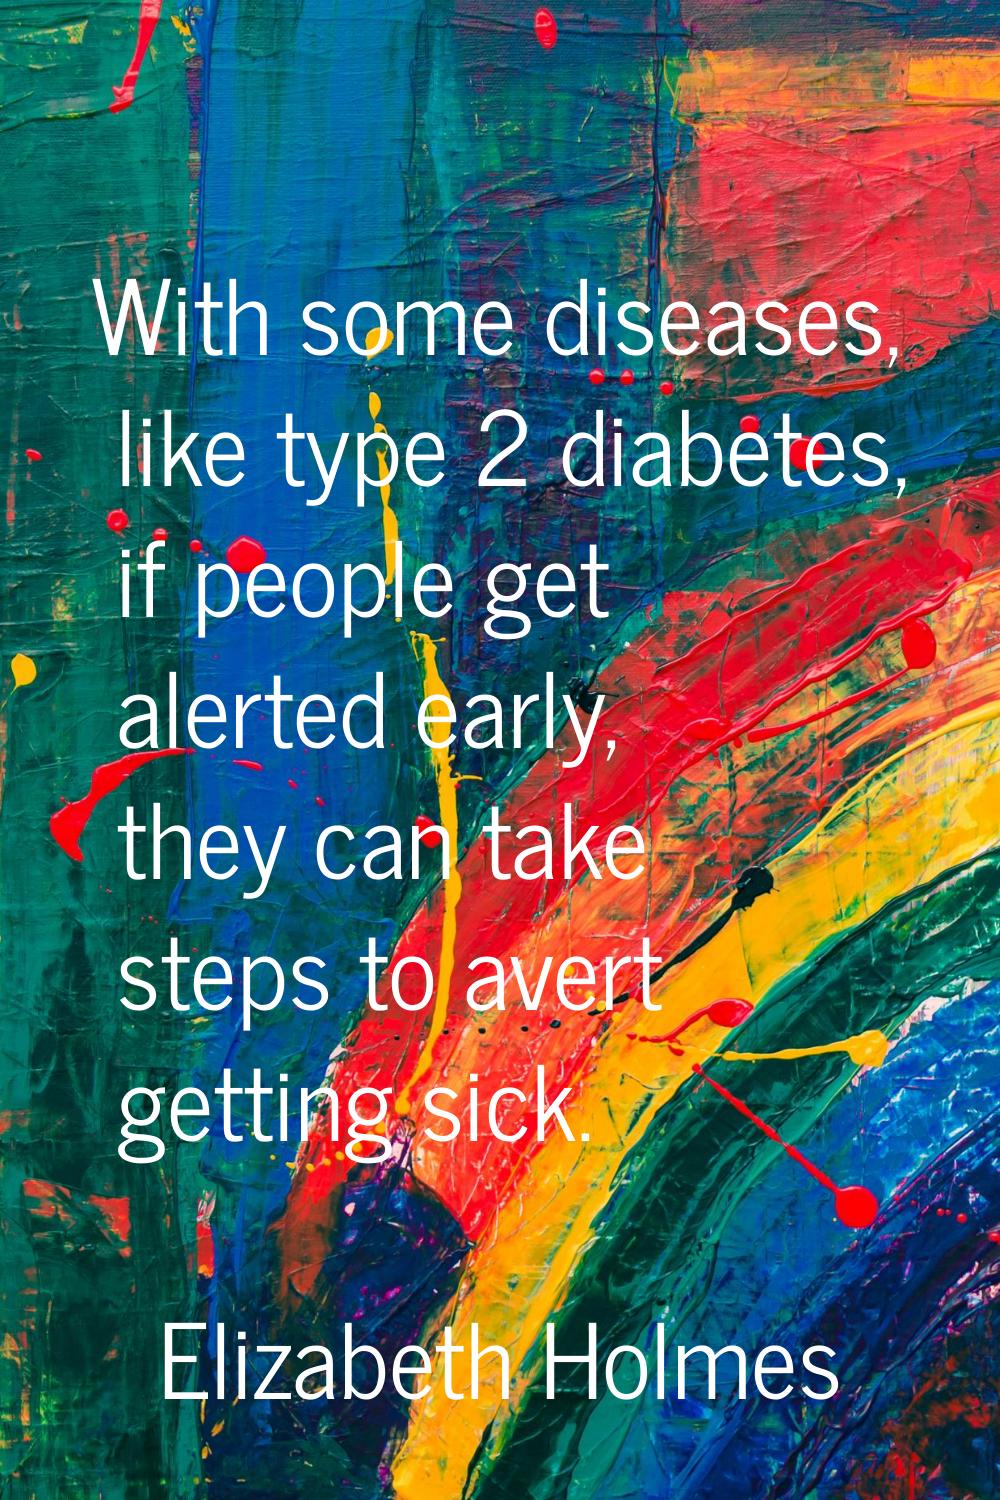 With some diseases, like type 2 diabetes, if people get alerted early, they can take steps to avert